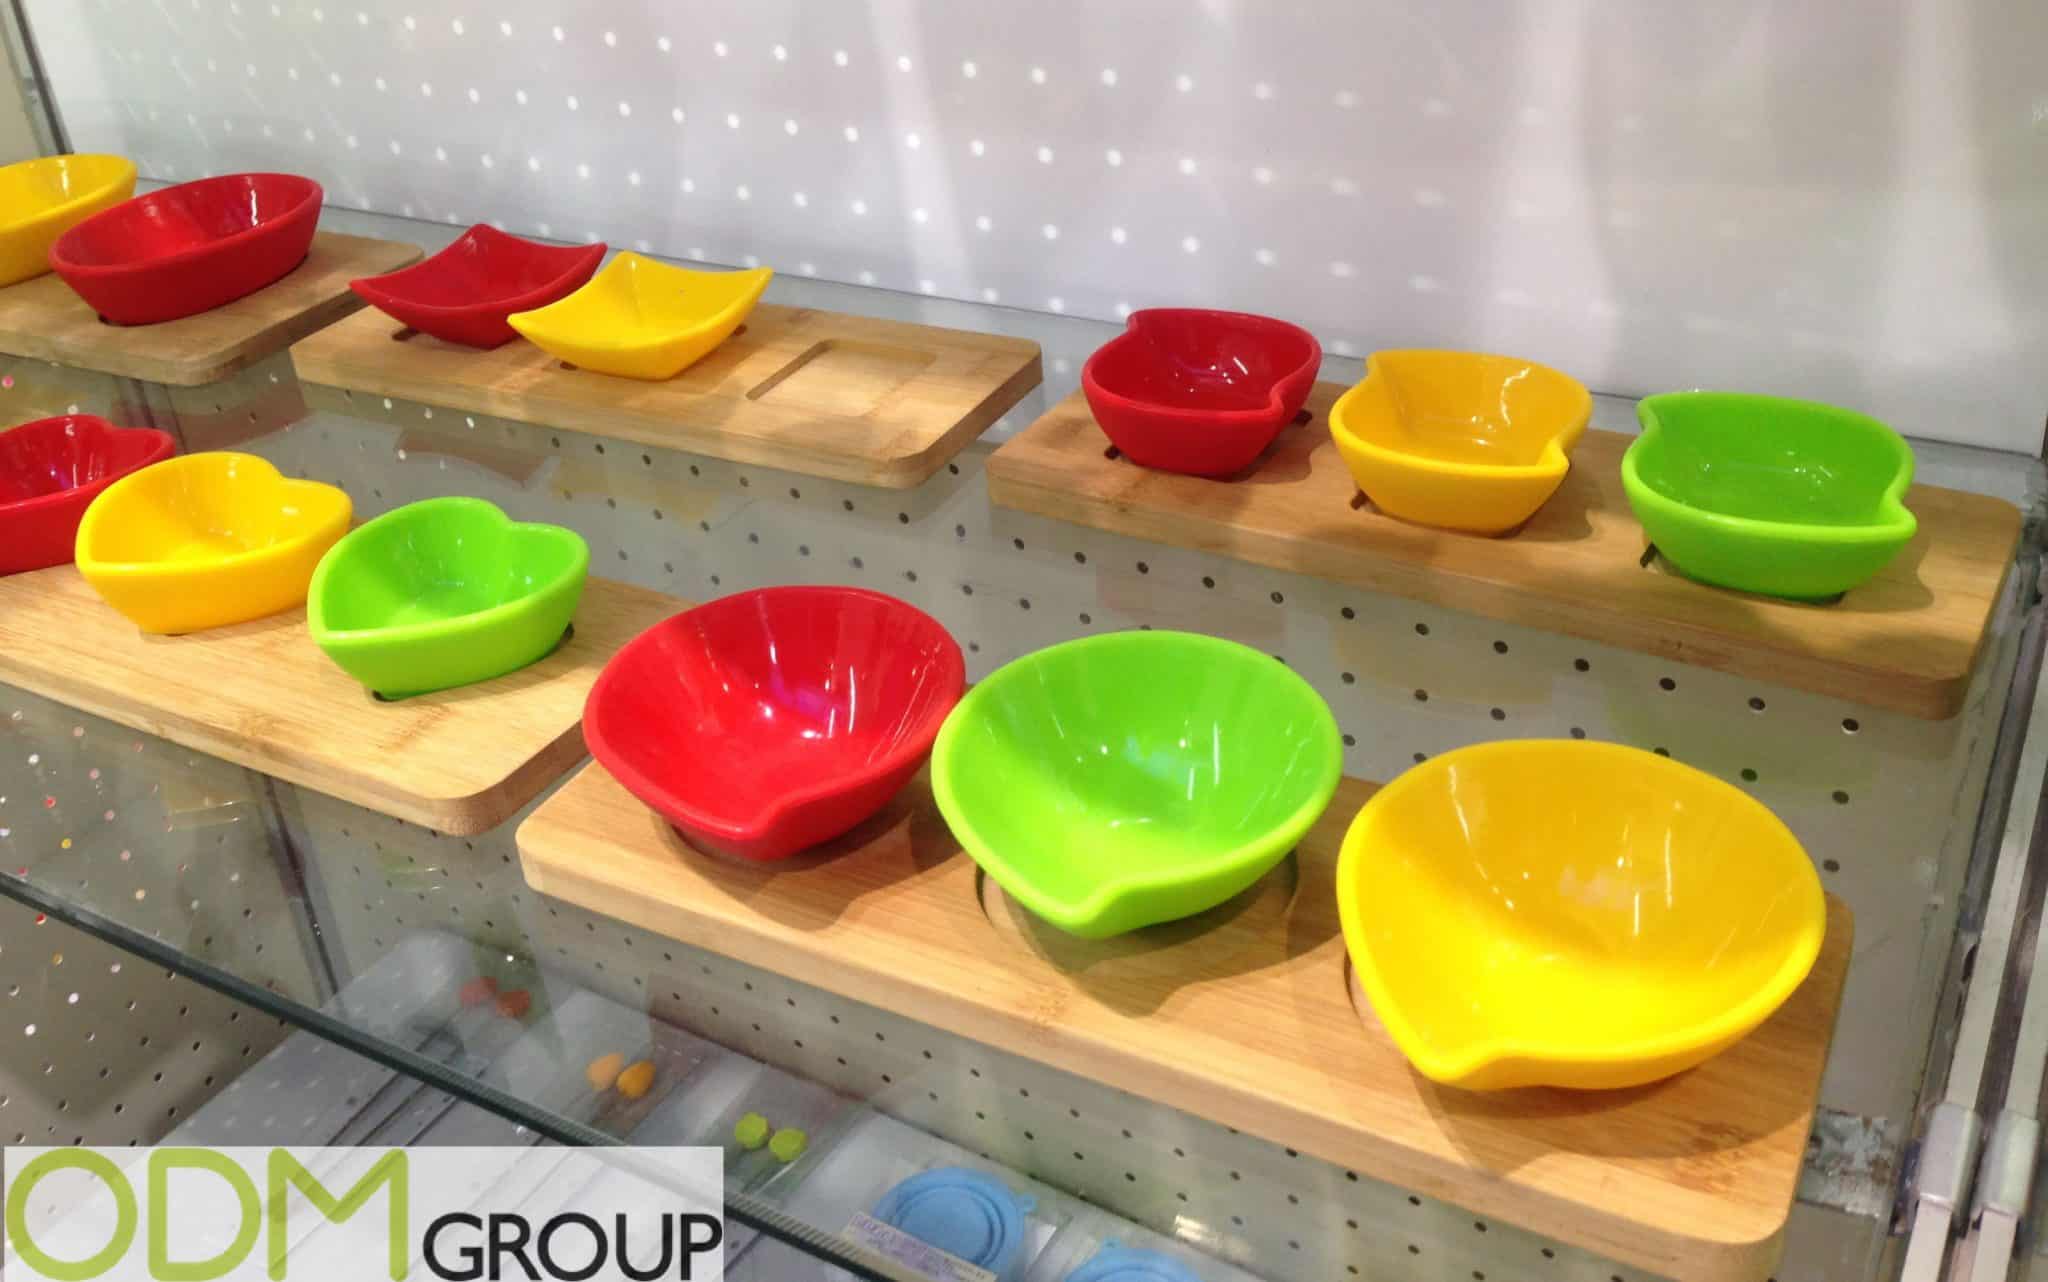  Promotional Kitchen Items - Silicone and Bamboo Serveware Sets 